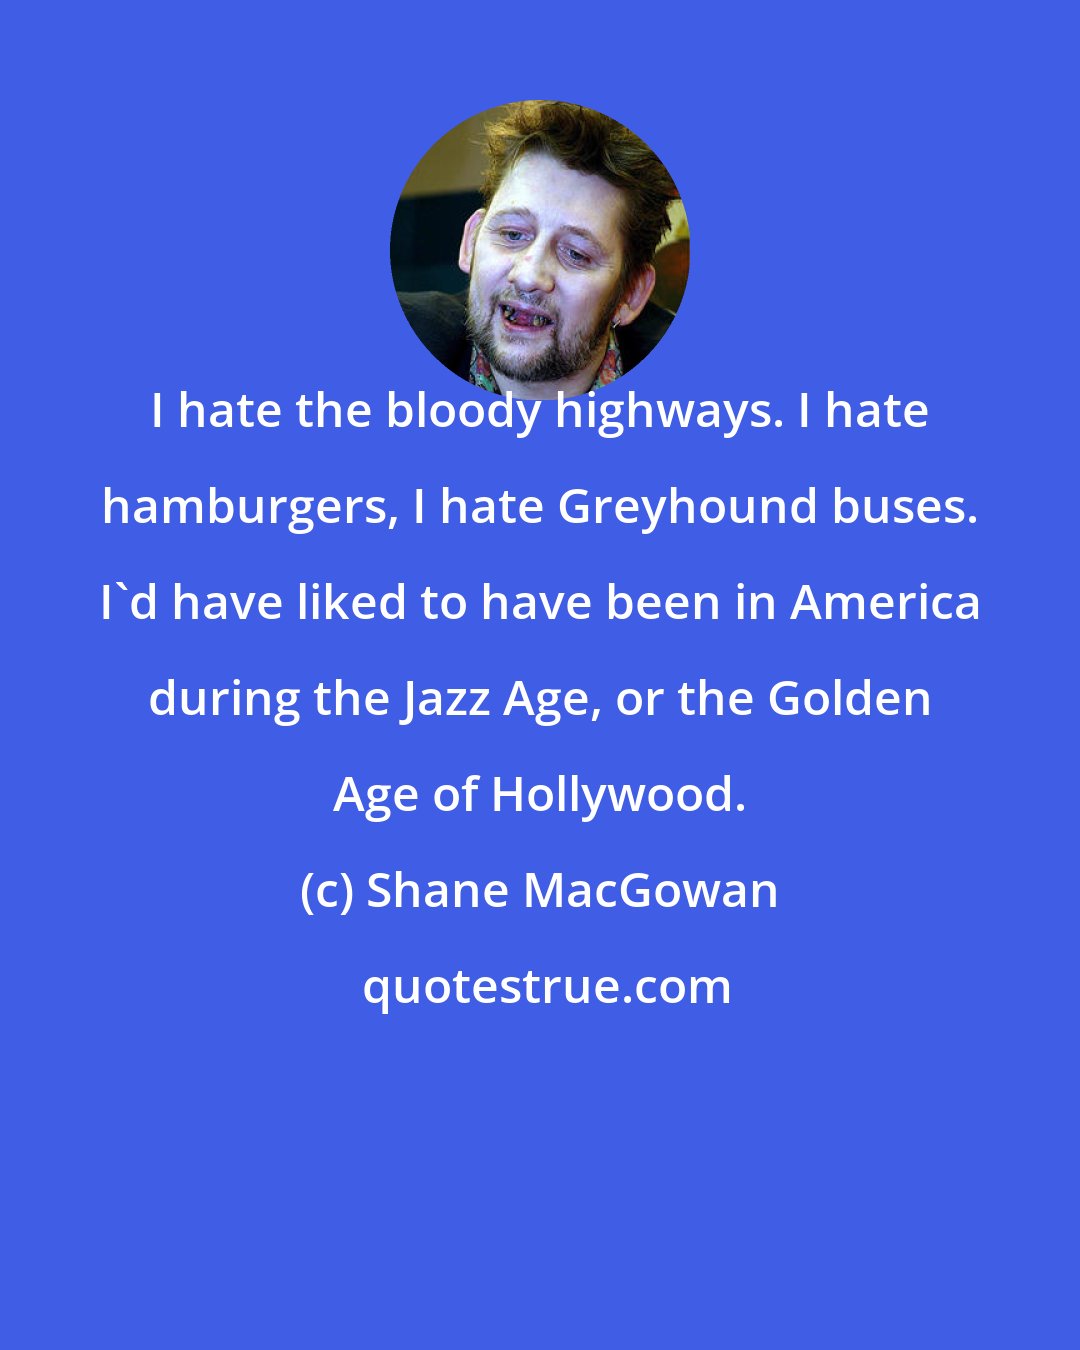 Shane MacGowan: I hate the bloody highways. I hate hamburgers, I hate Greyhound buses. I'd have liked to have been in America during the Jazz Age, or the Golden Age of Hollywood.